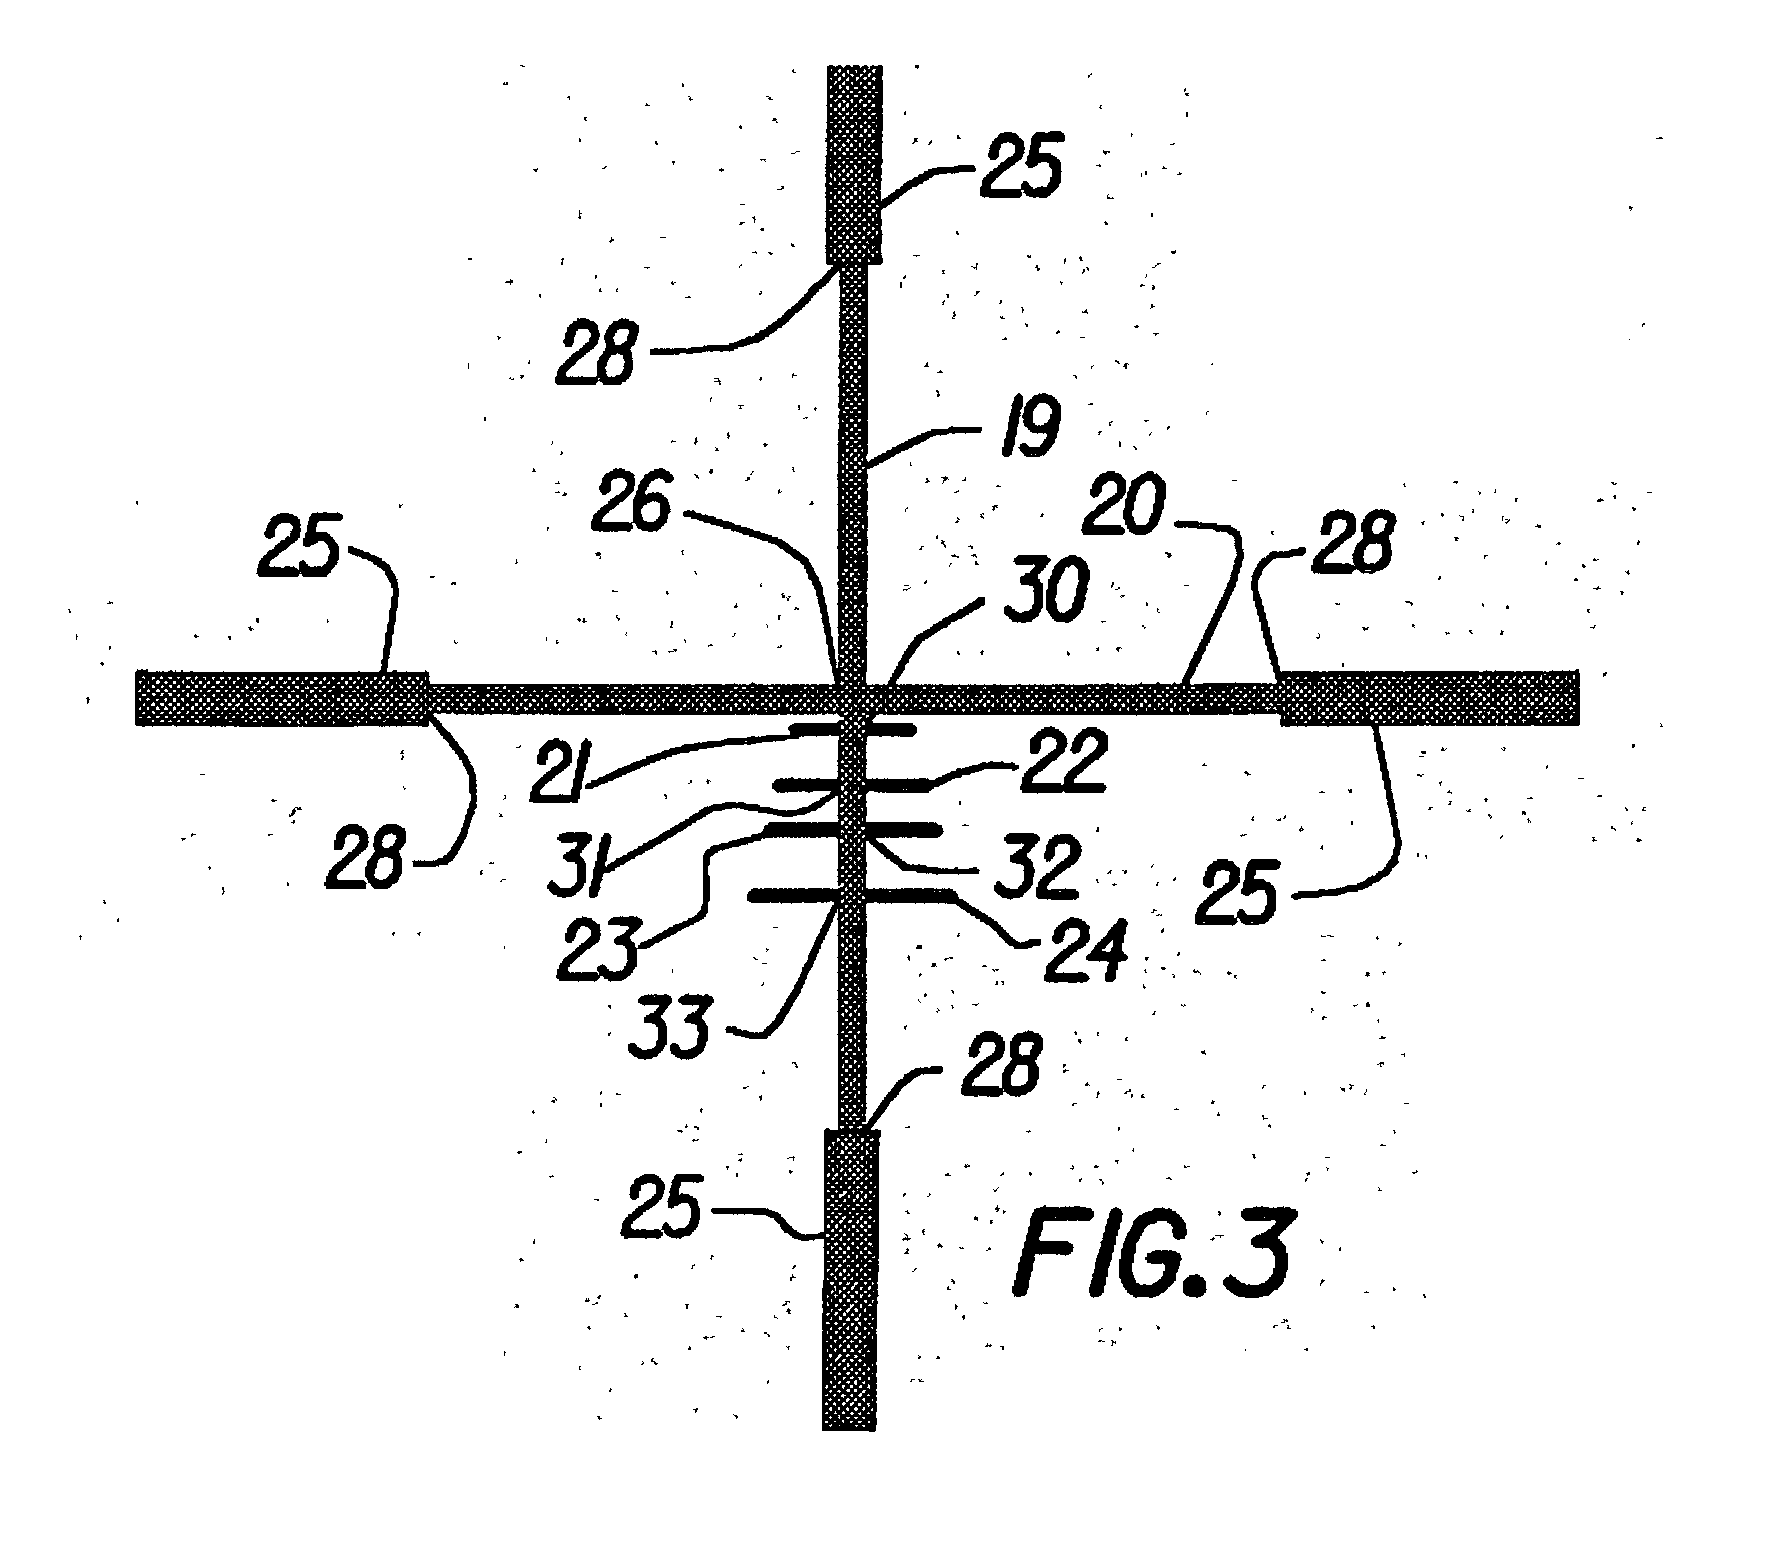 Reticle for telescopic gunsight and method for using cross reference to related application